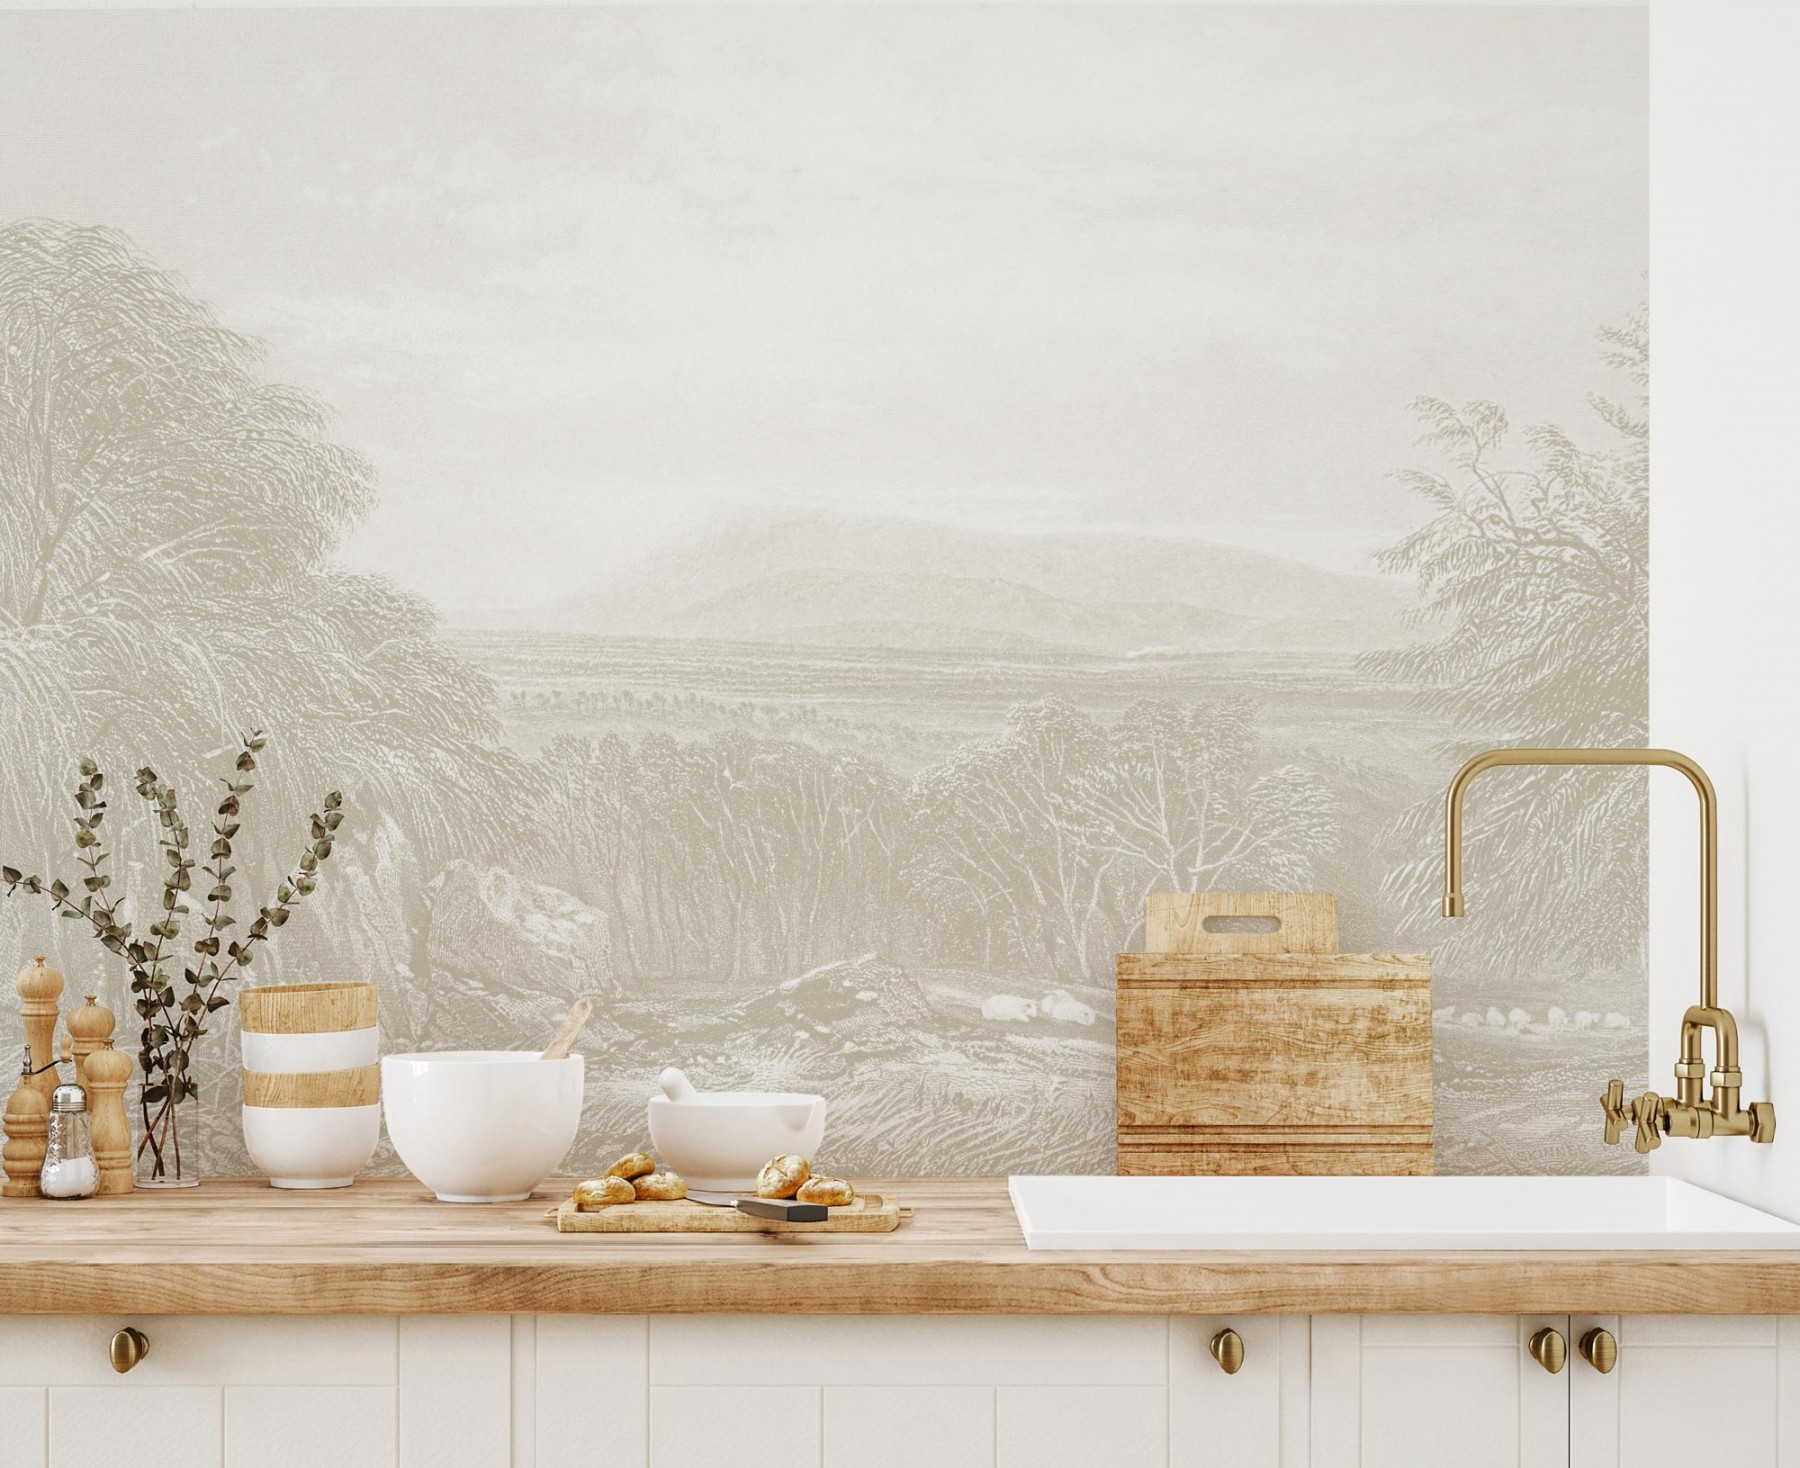 Macedon Ranges Etched - Gold | WALLPAPER